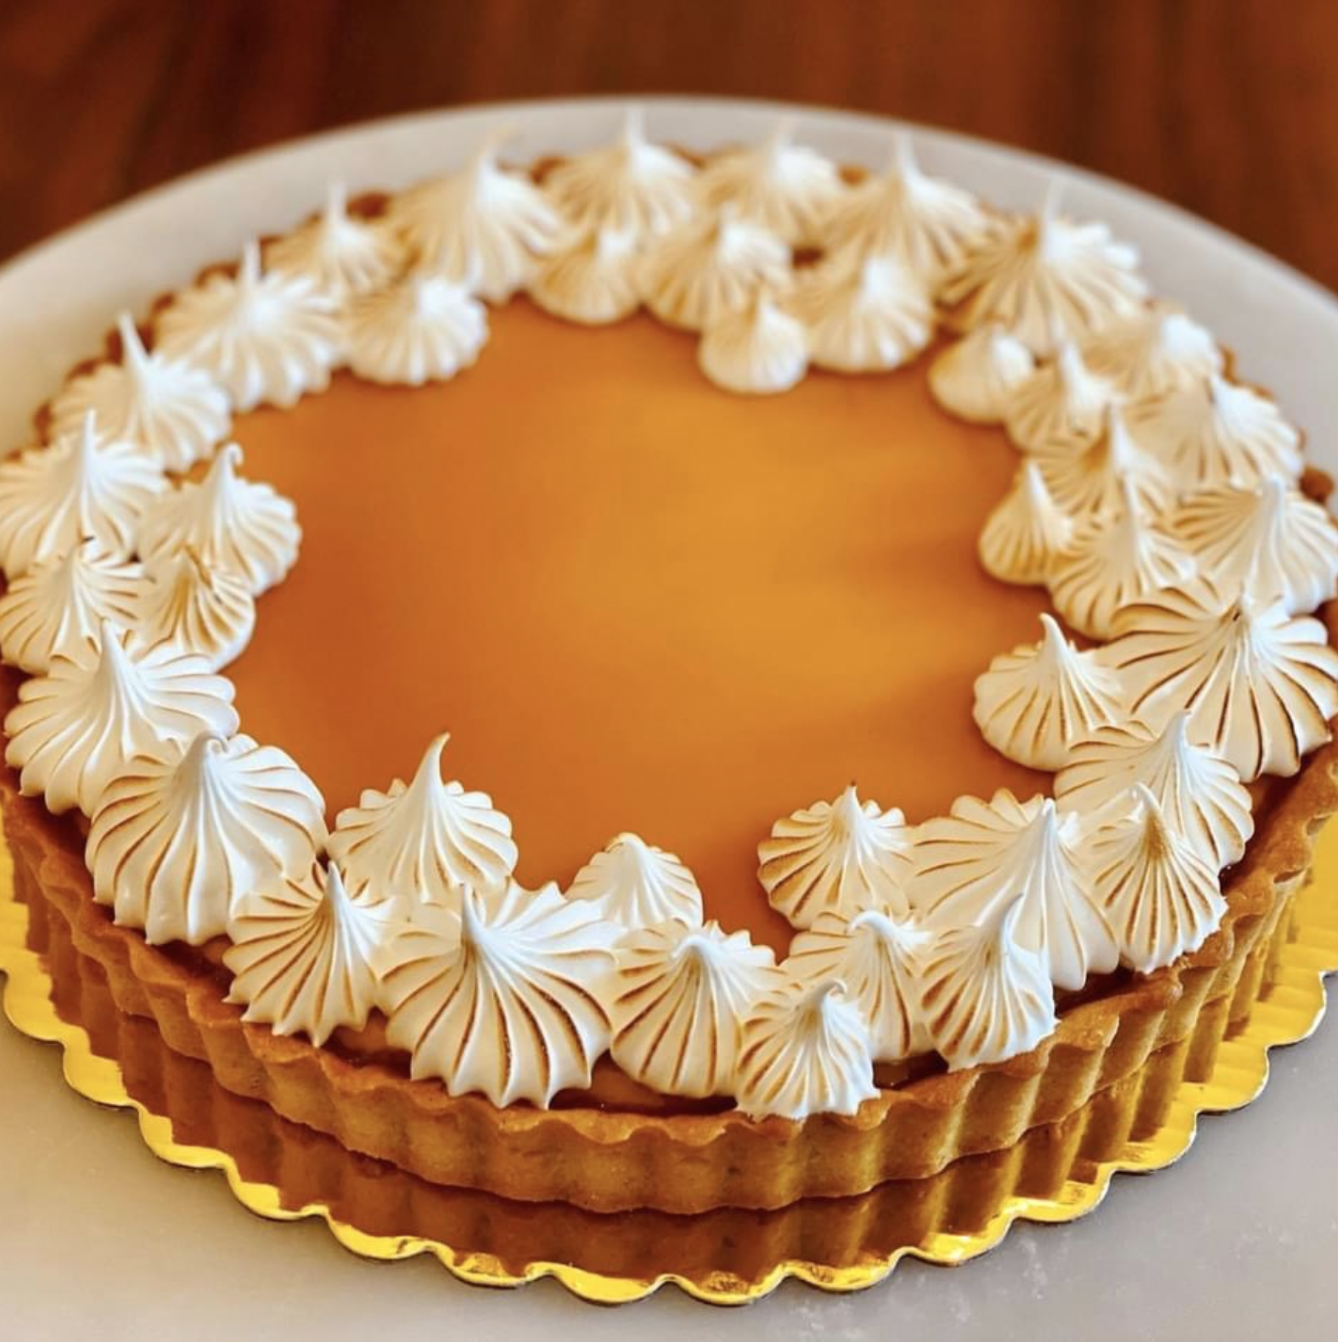 The passion fruit tart from Patisserié by Jisun is otherworldly. The lightly caramelized meringue compliments the bright and tart filling in a way that can only be described in one word: perfection.